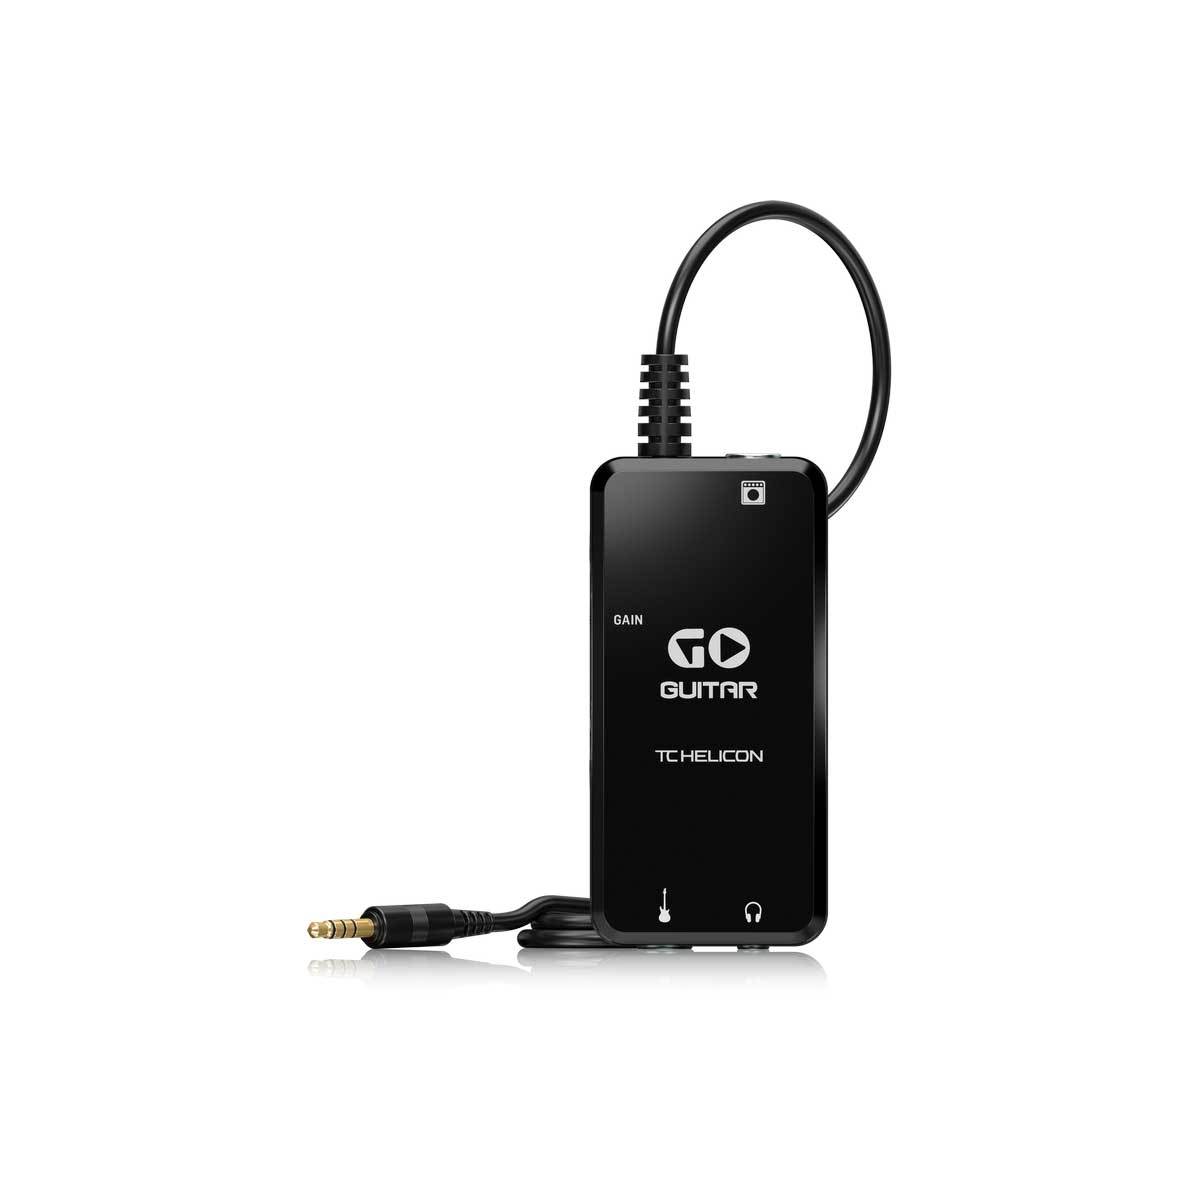 Guitar Audio Interfaces - TC Helicon Go Guitar Portable Guitar Interface For Mobile Devices